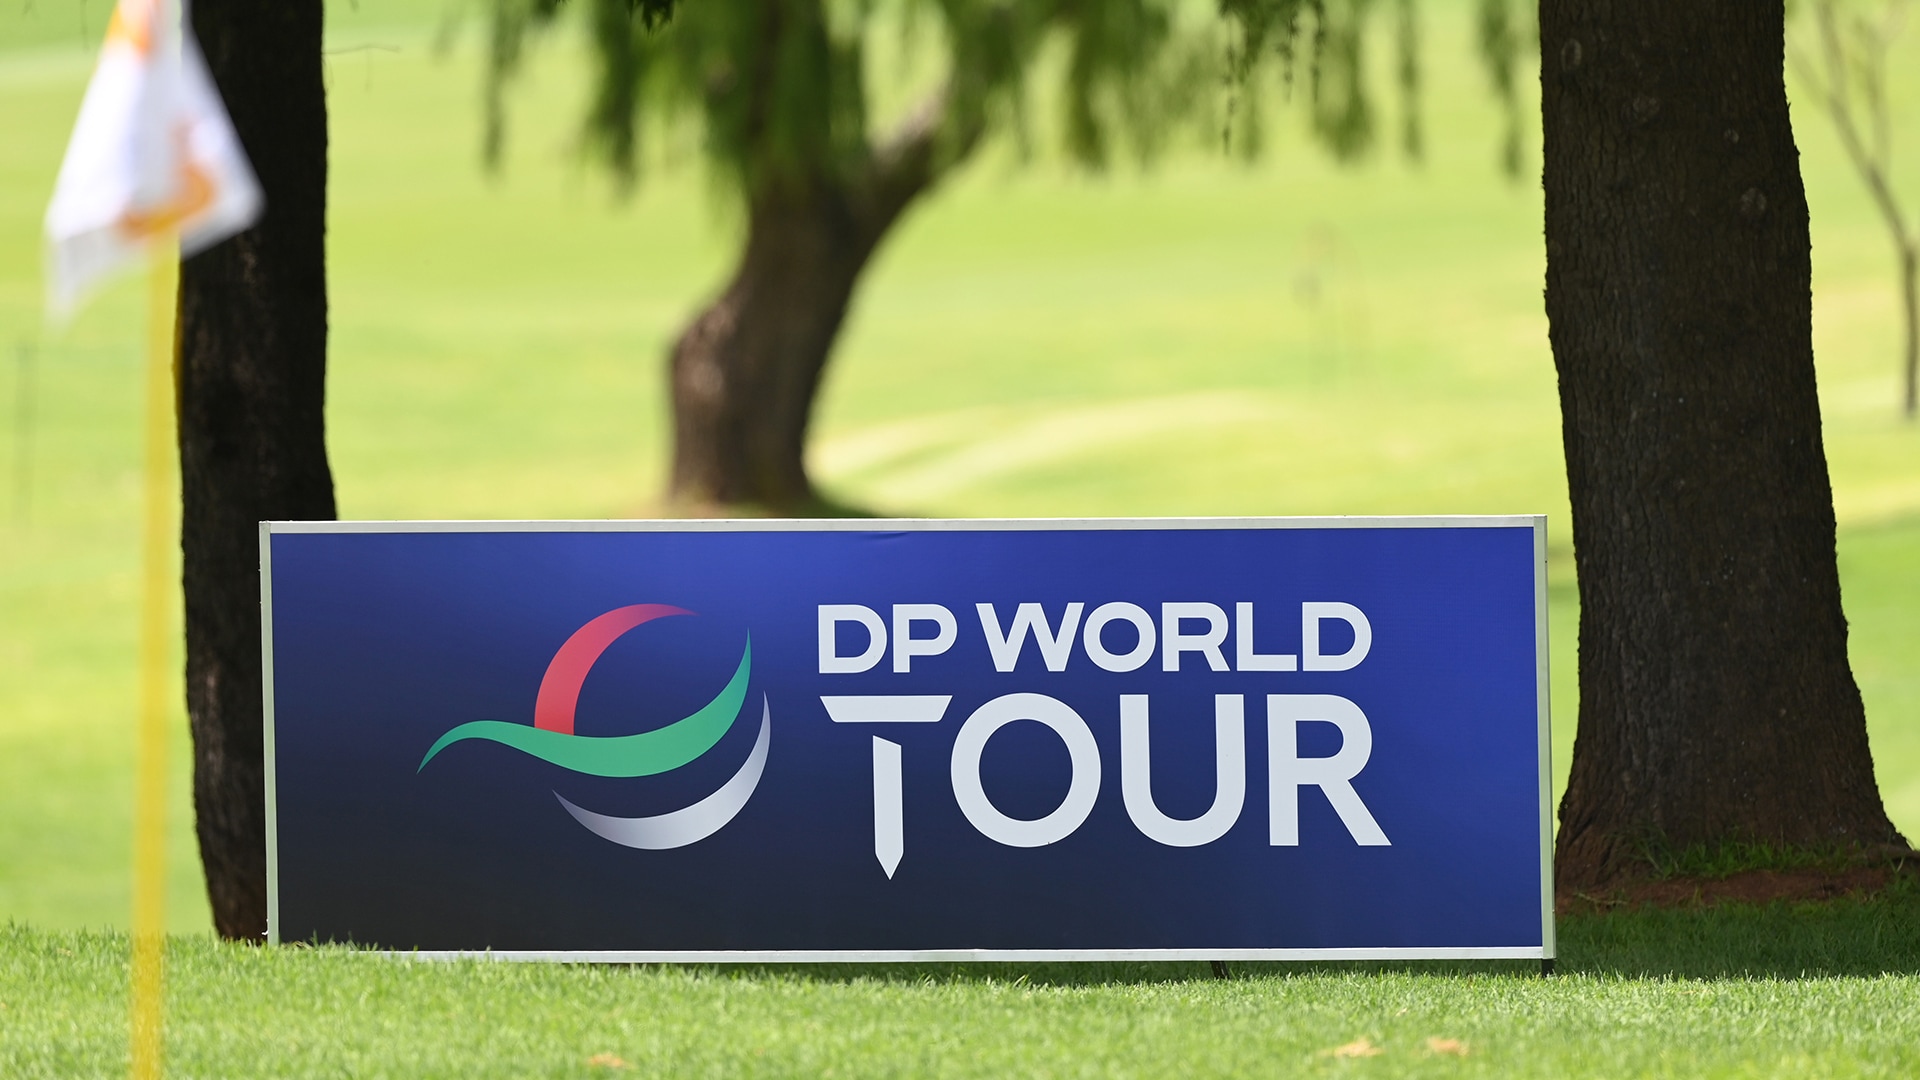 Top Japan Tour players to earn DP World Tour cards as part of new agreement